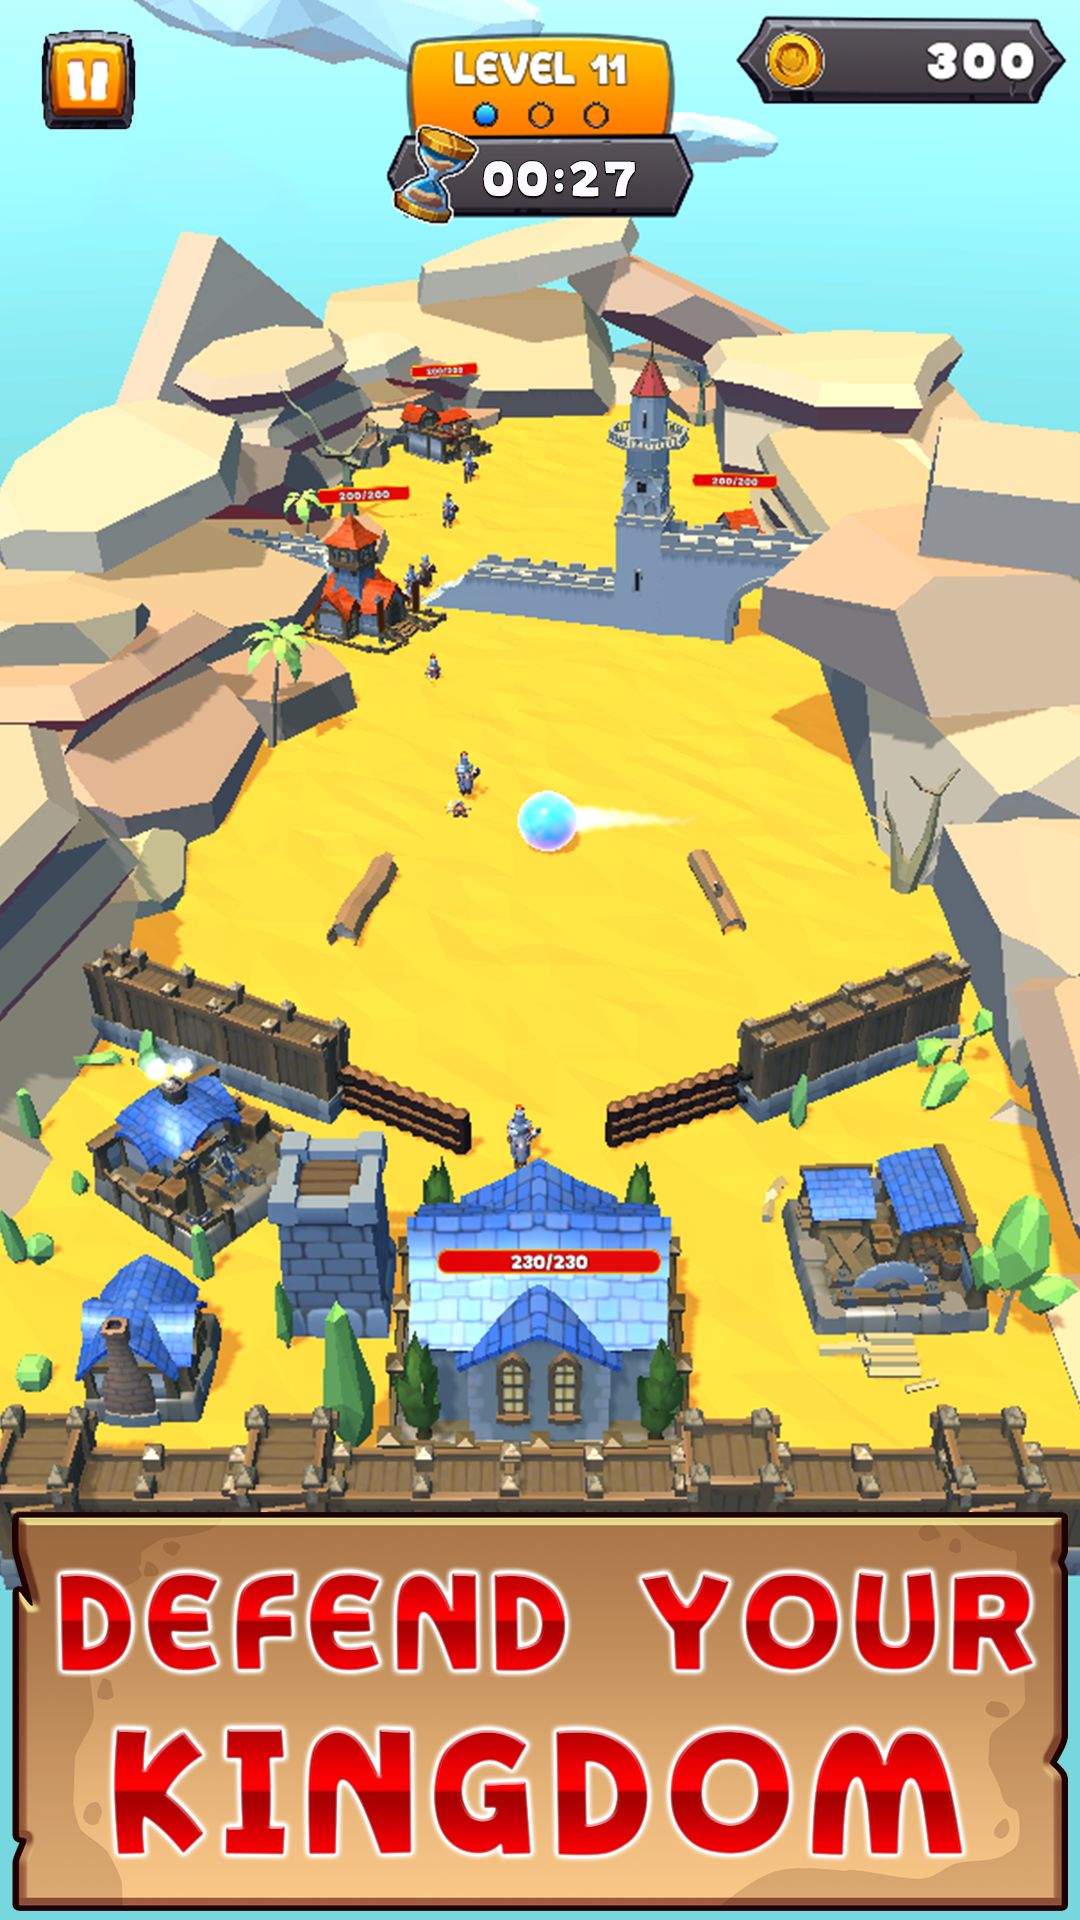 Full version of Android Physics game apk Pinball Kingdom: Tower Defense for tablet and phone.